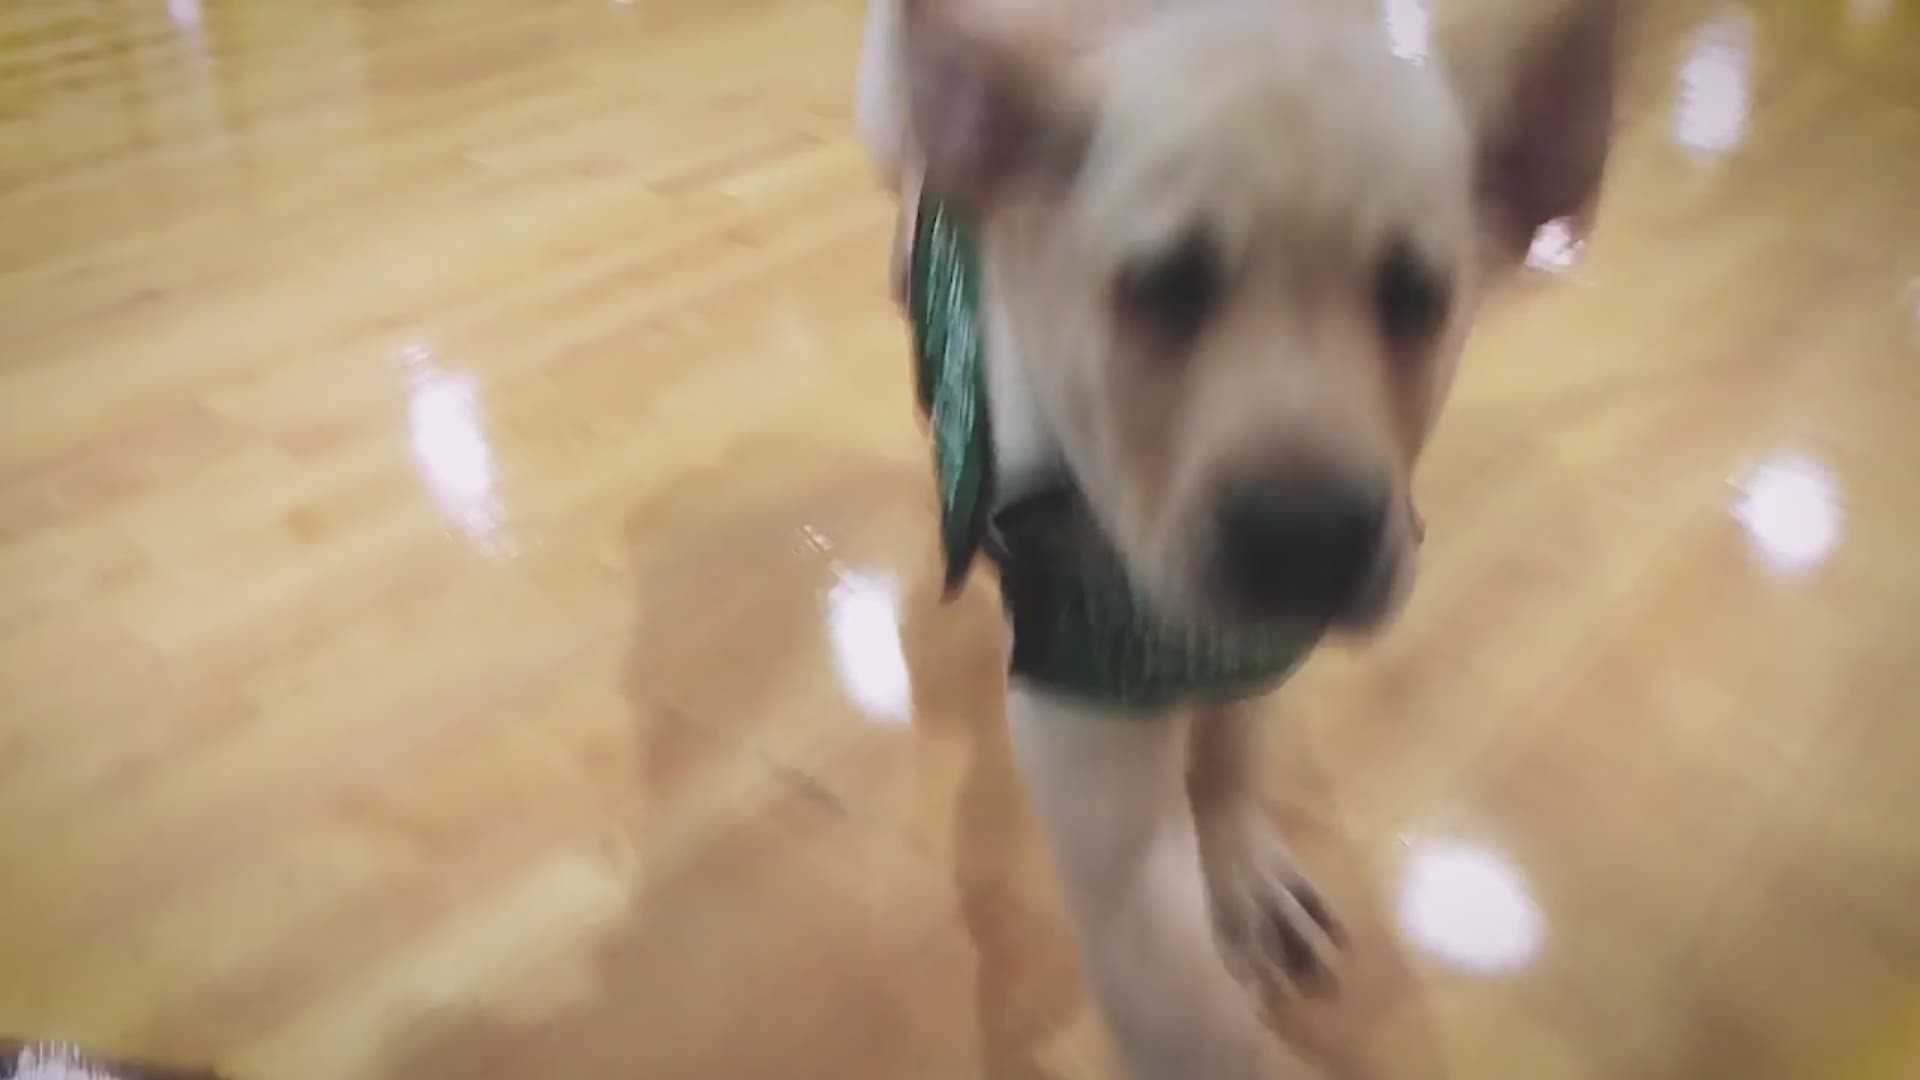 Swish the Puppy is melting hearts across the internet after his introduction to Dirk Nowitzki. Video: Dallas Mavericks